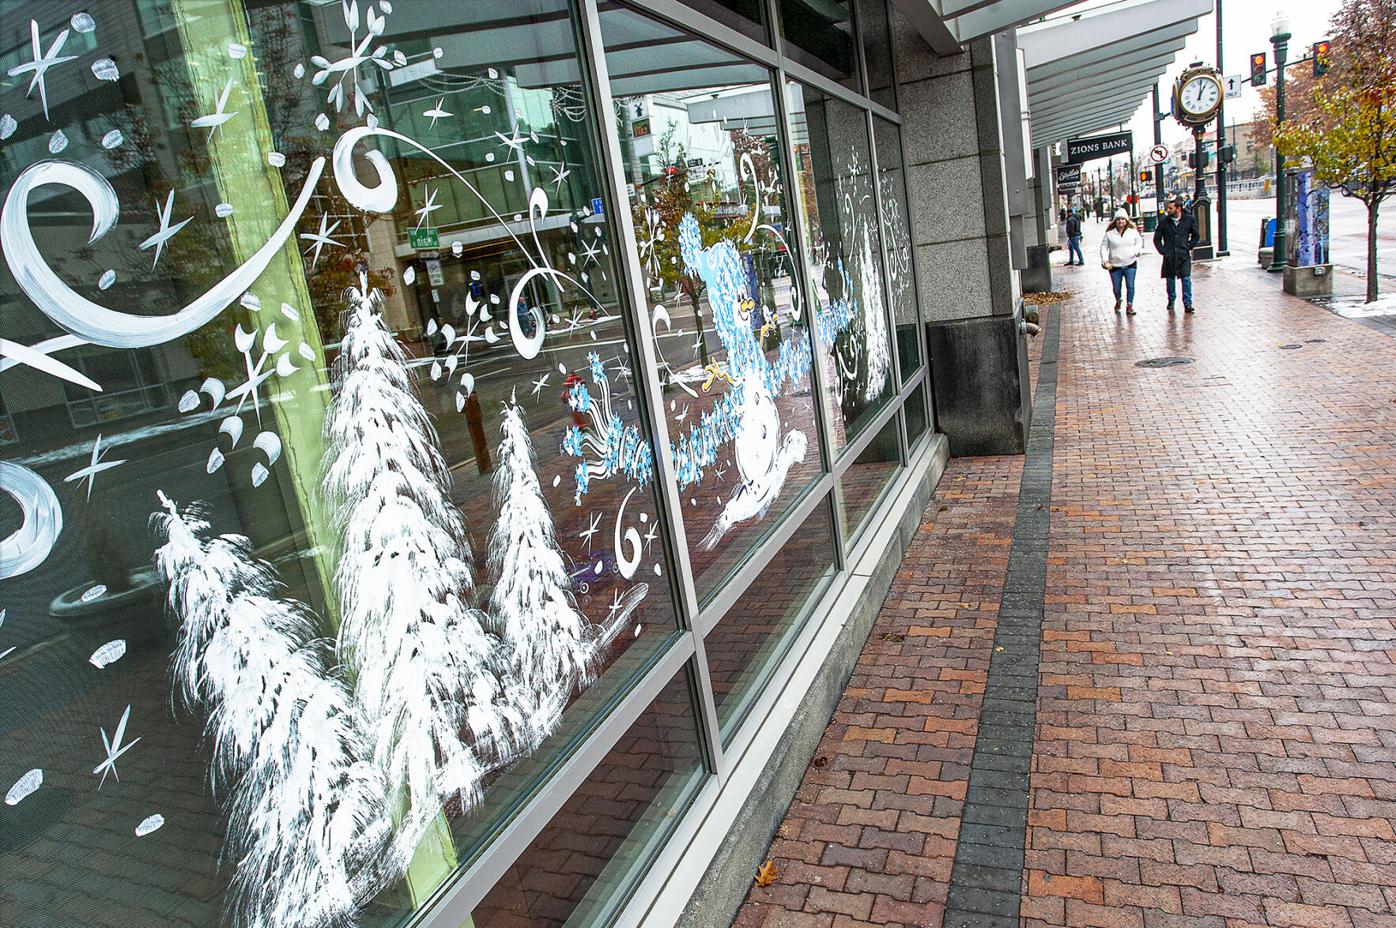 Spreading holiday cheer in Boise with window art